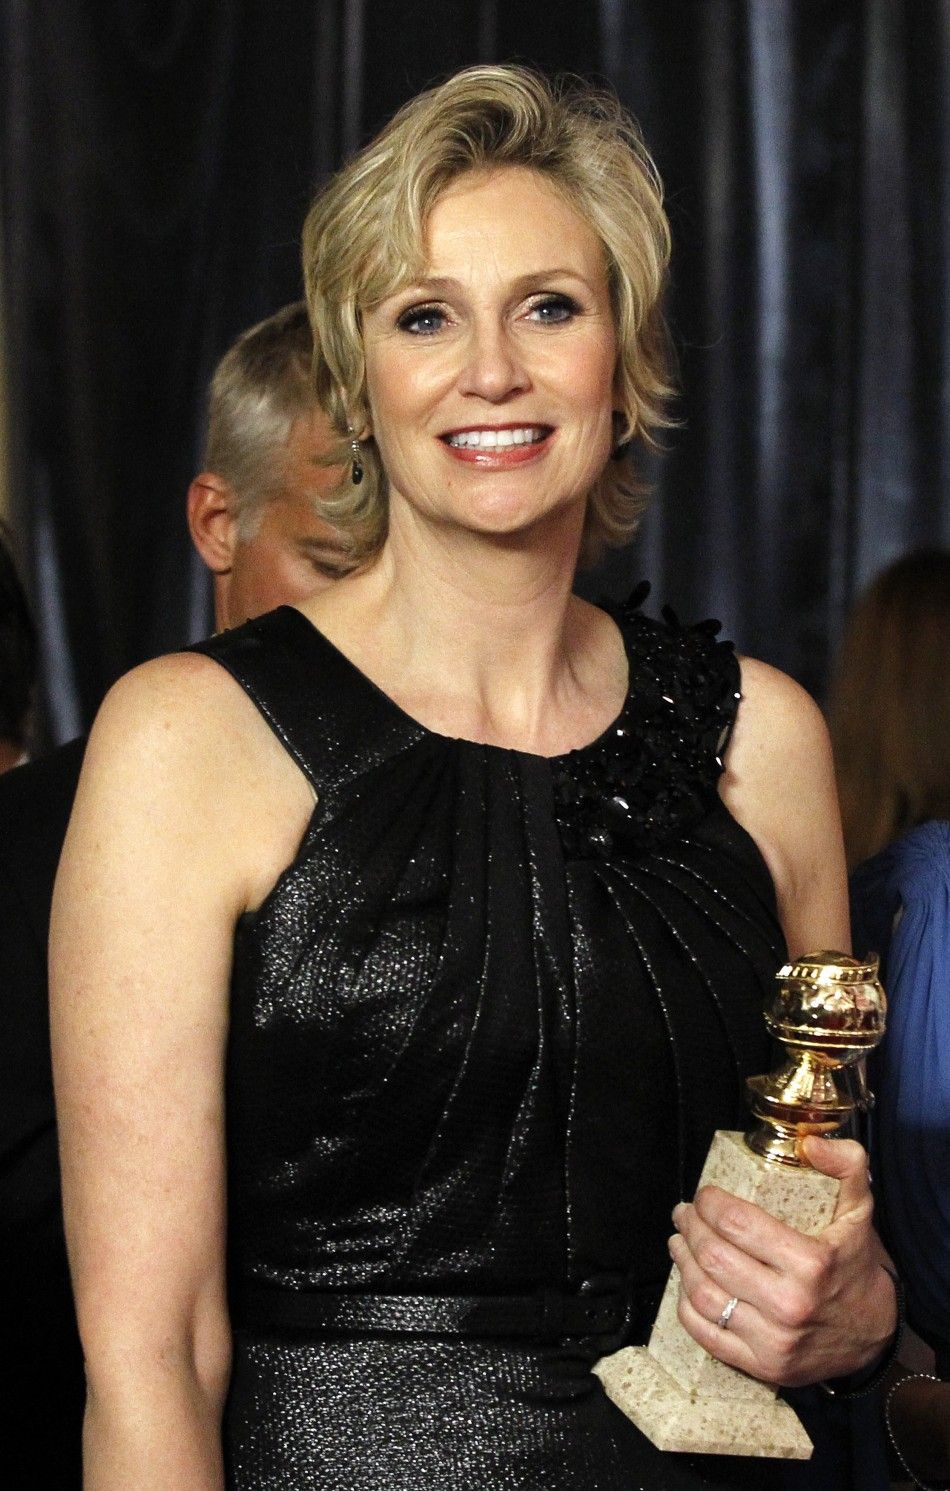 Actress Jane Lynch holds her award for Best Performance by an Actress in a Supporting Role in a Series, Mini-Series or Motion Picture Made for Television at the Warner Bros. and InStyle after-party for the 68th annual Golden Globe Awards in Beverly Hills,